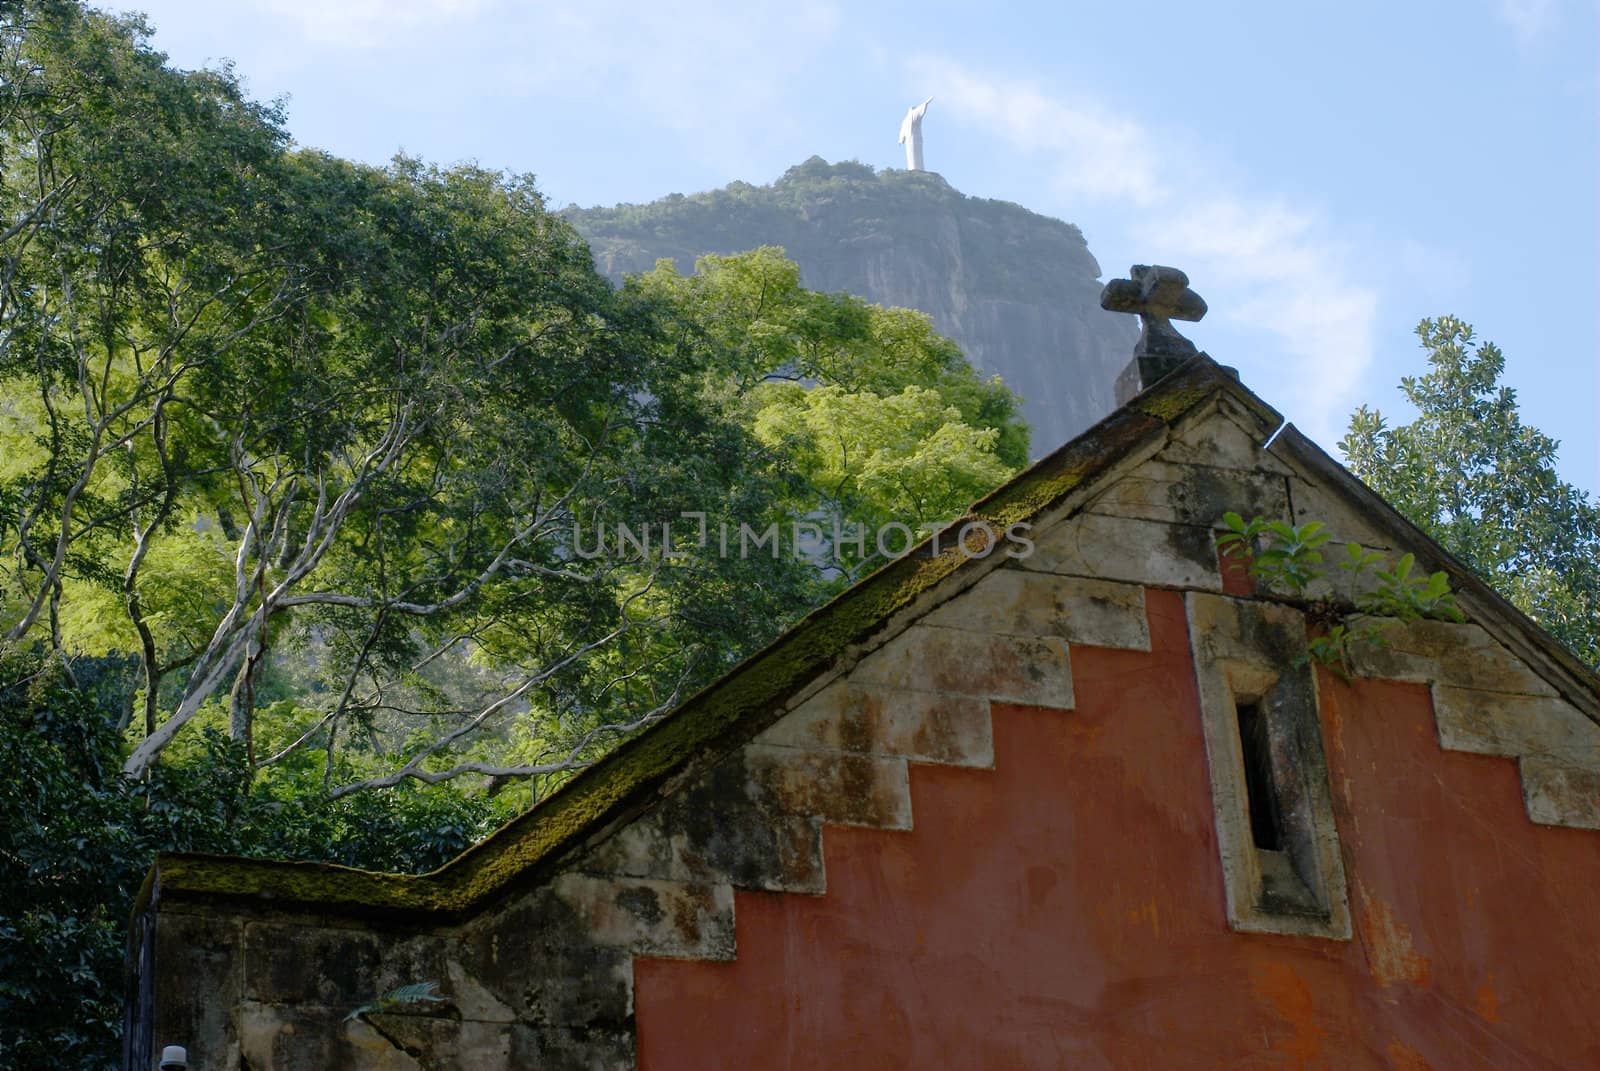 The old red house and the Corcovado Christ Statue view by eldervs